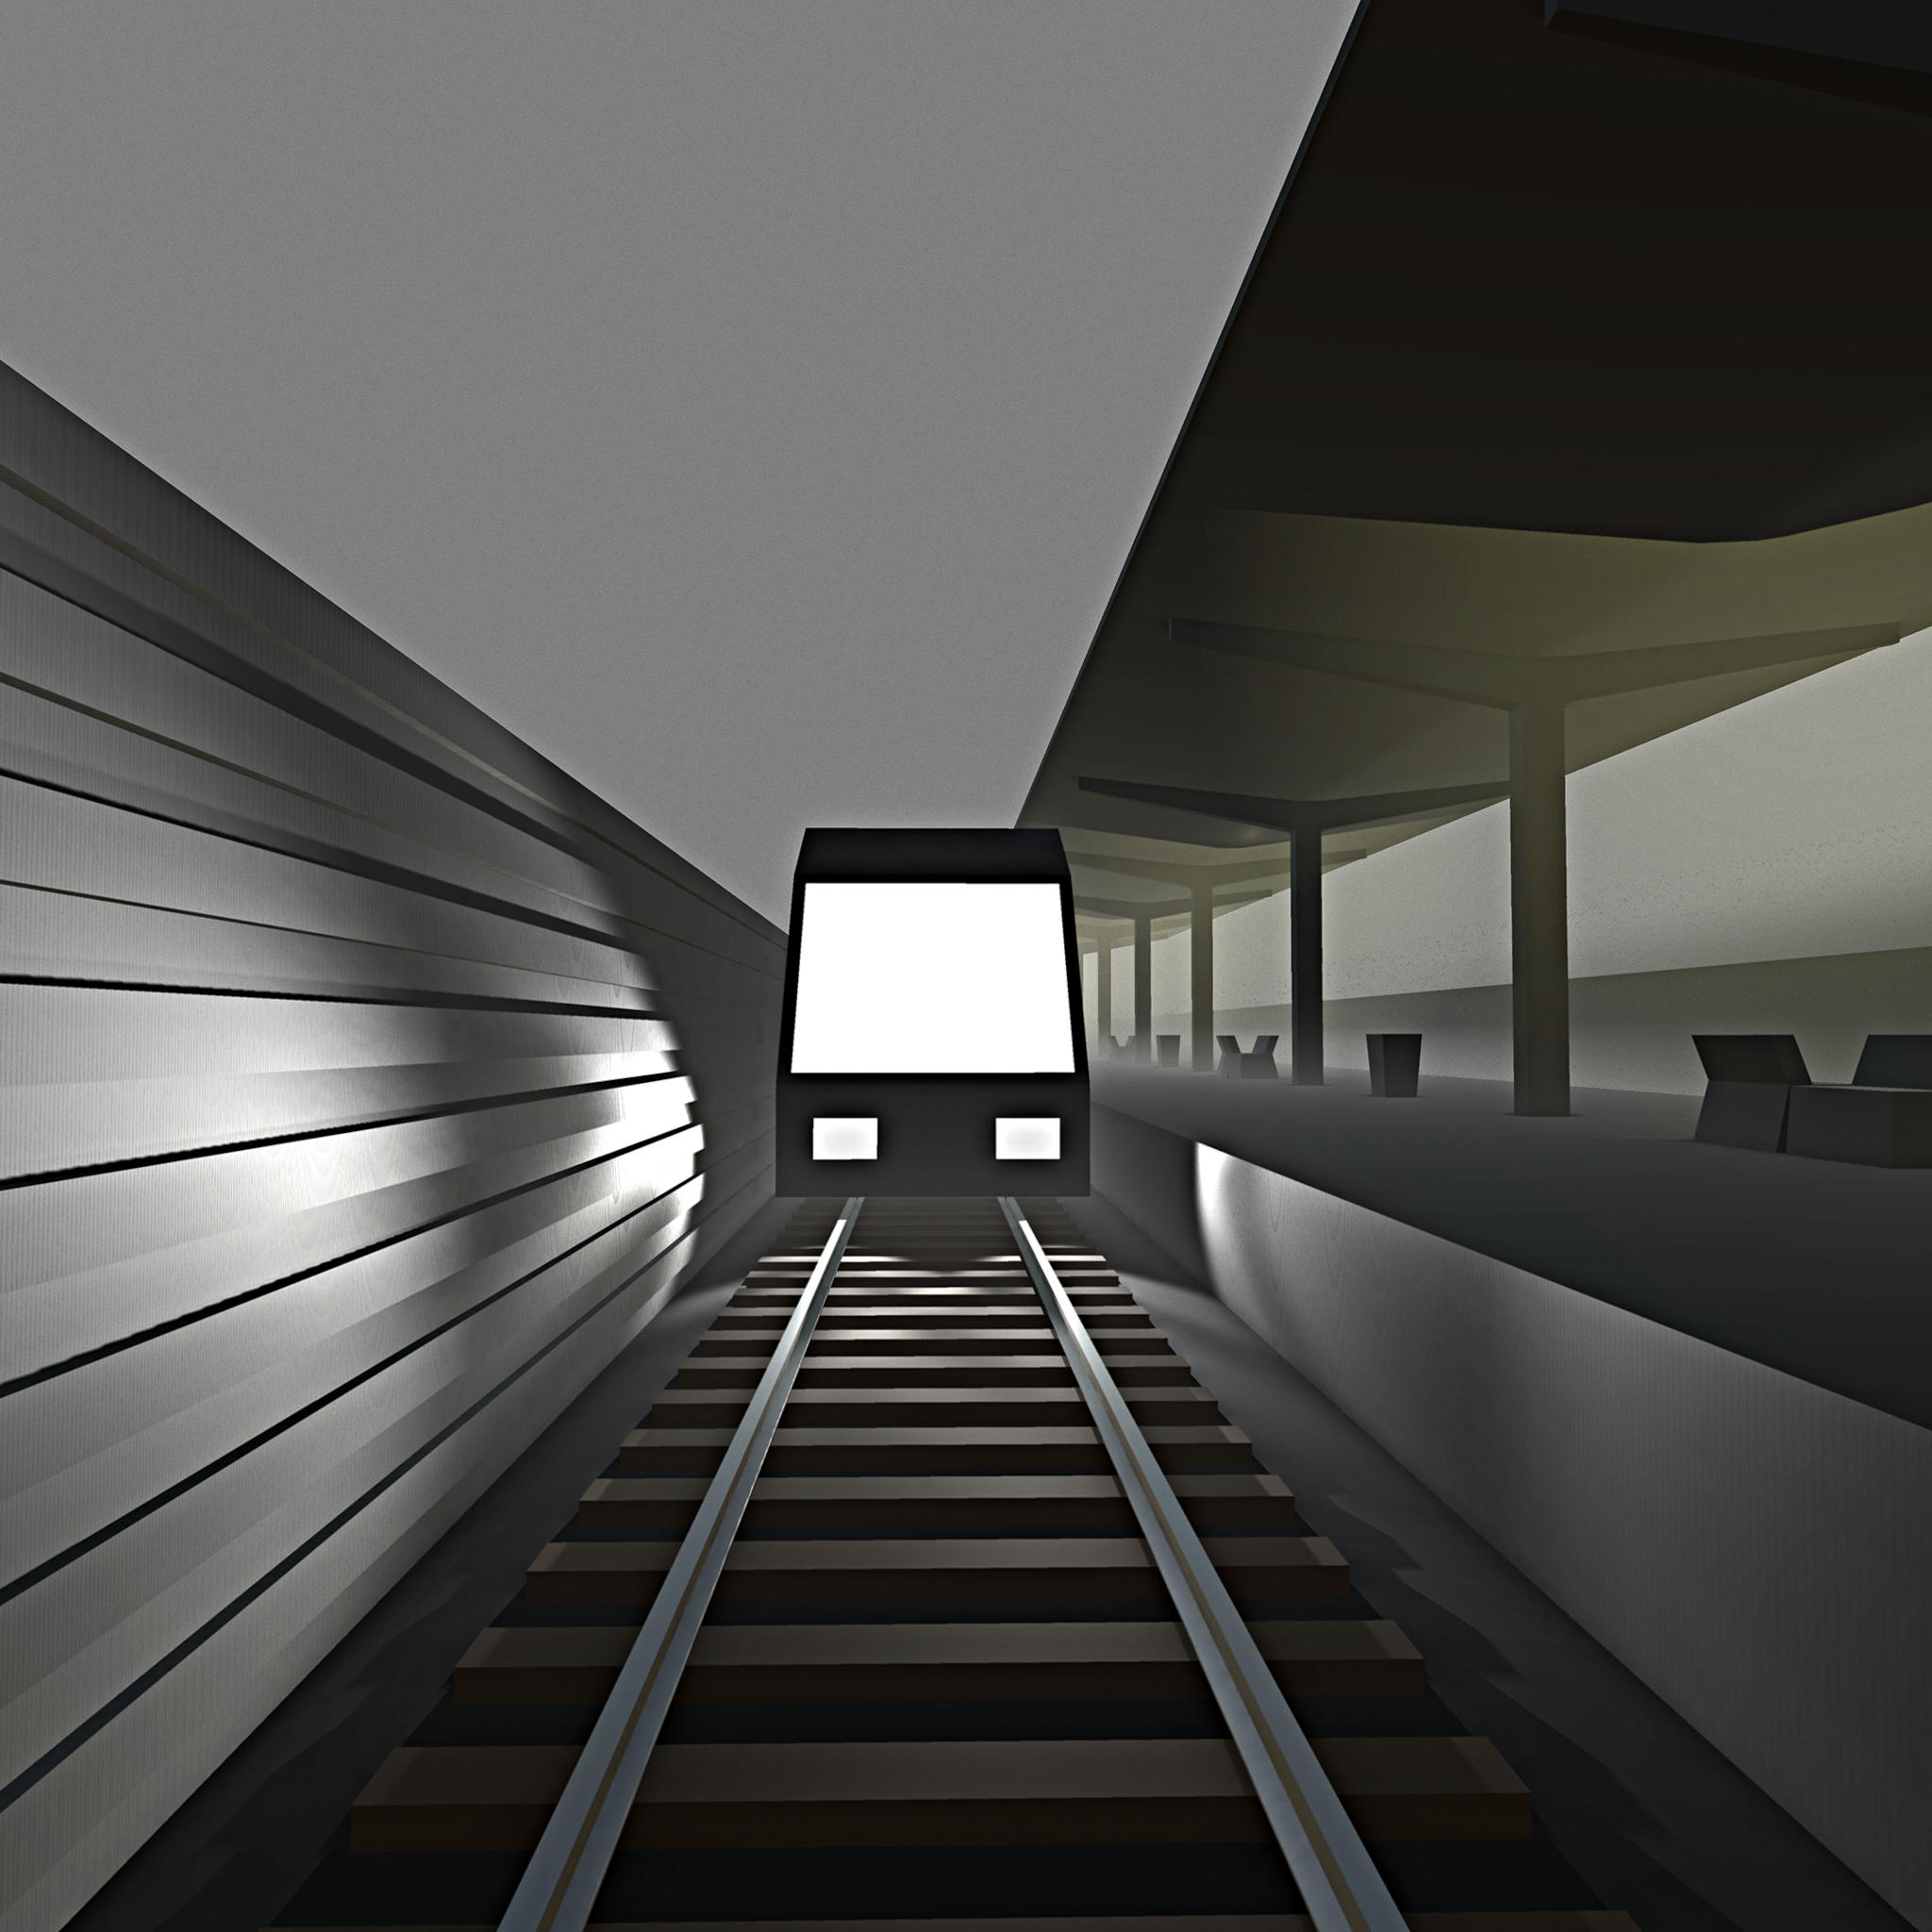 screenshot / computer generated - POV on traintracks with approaching train ahead